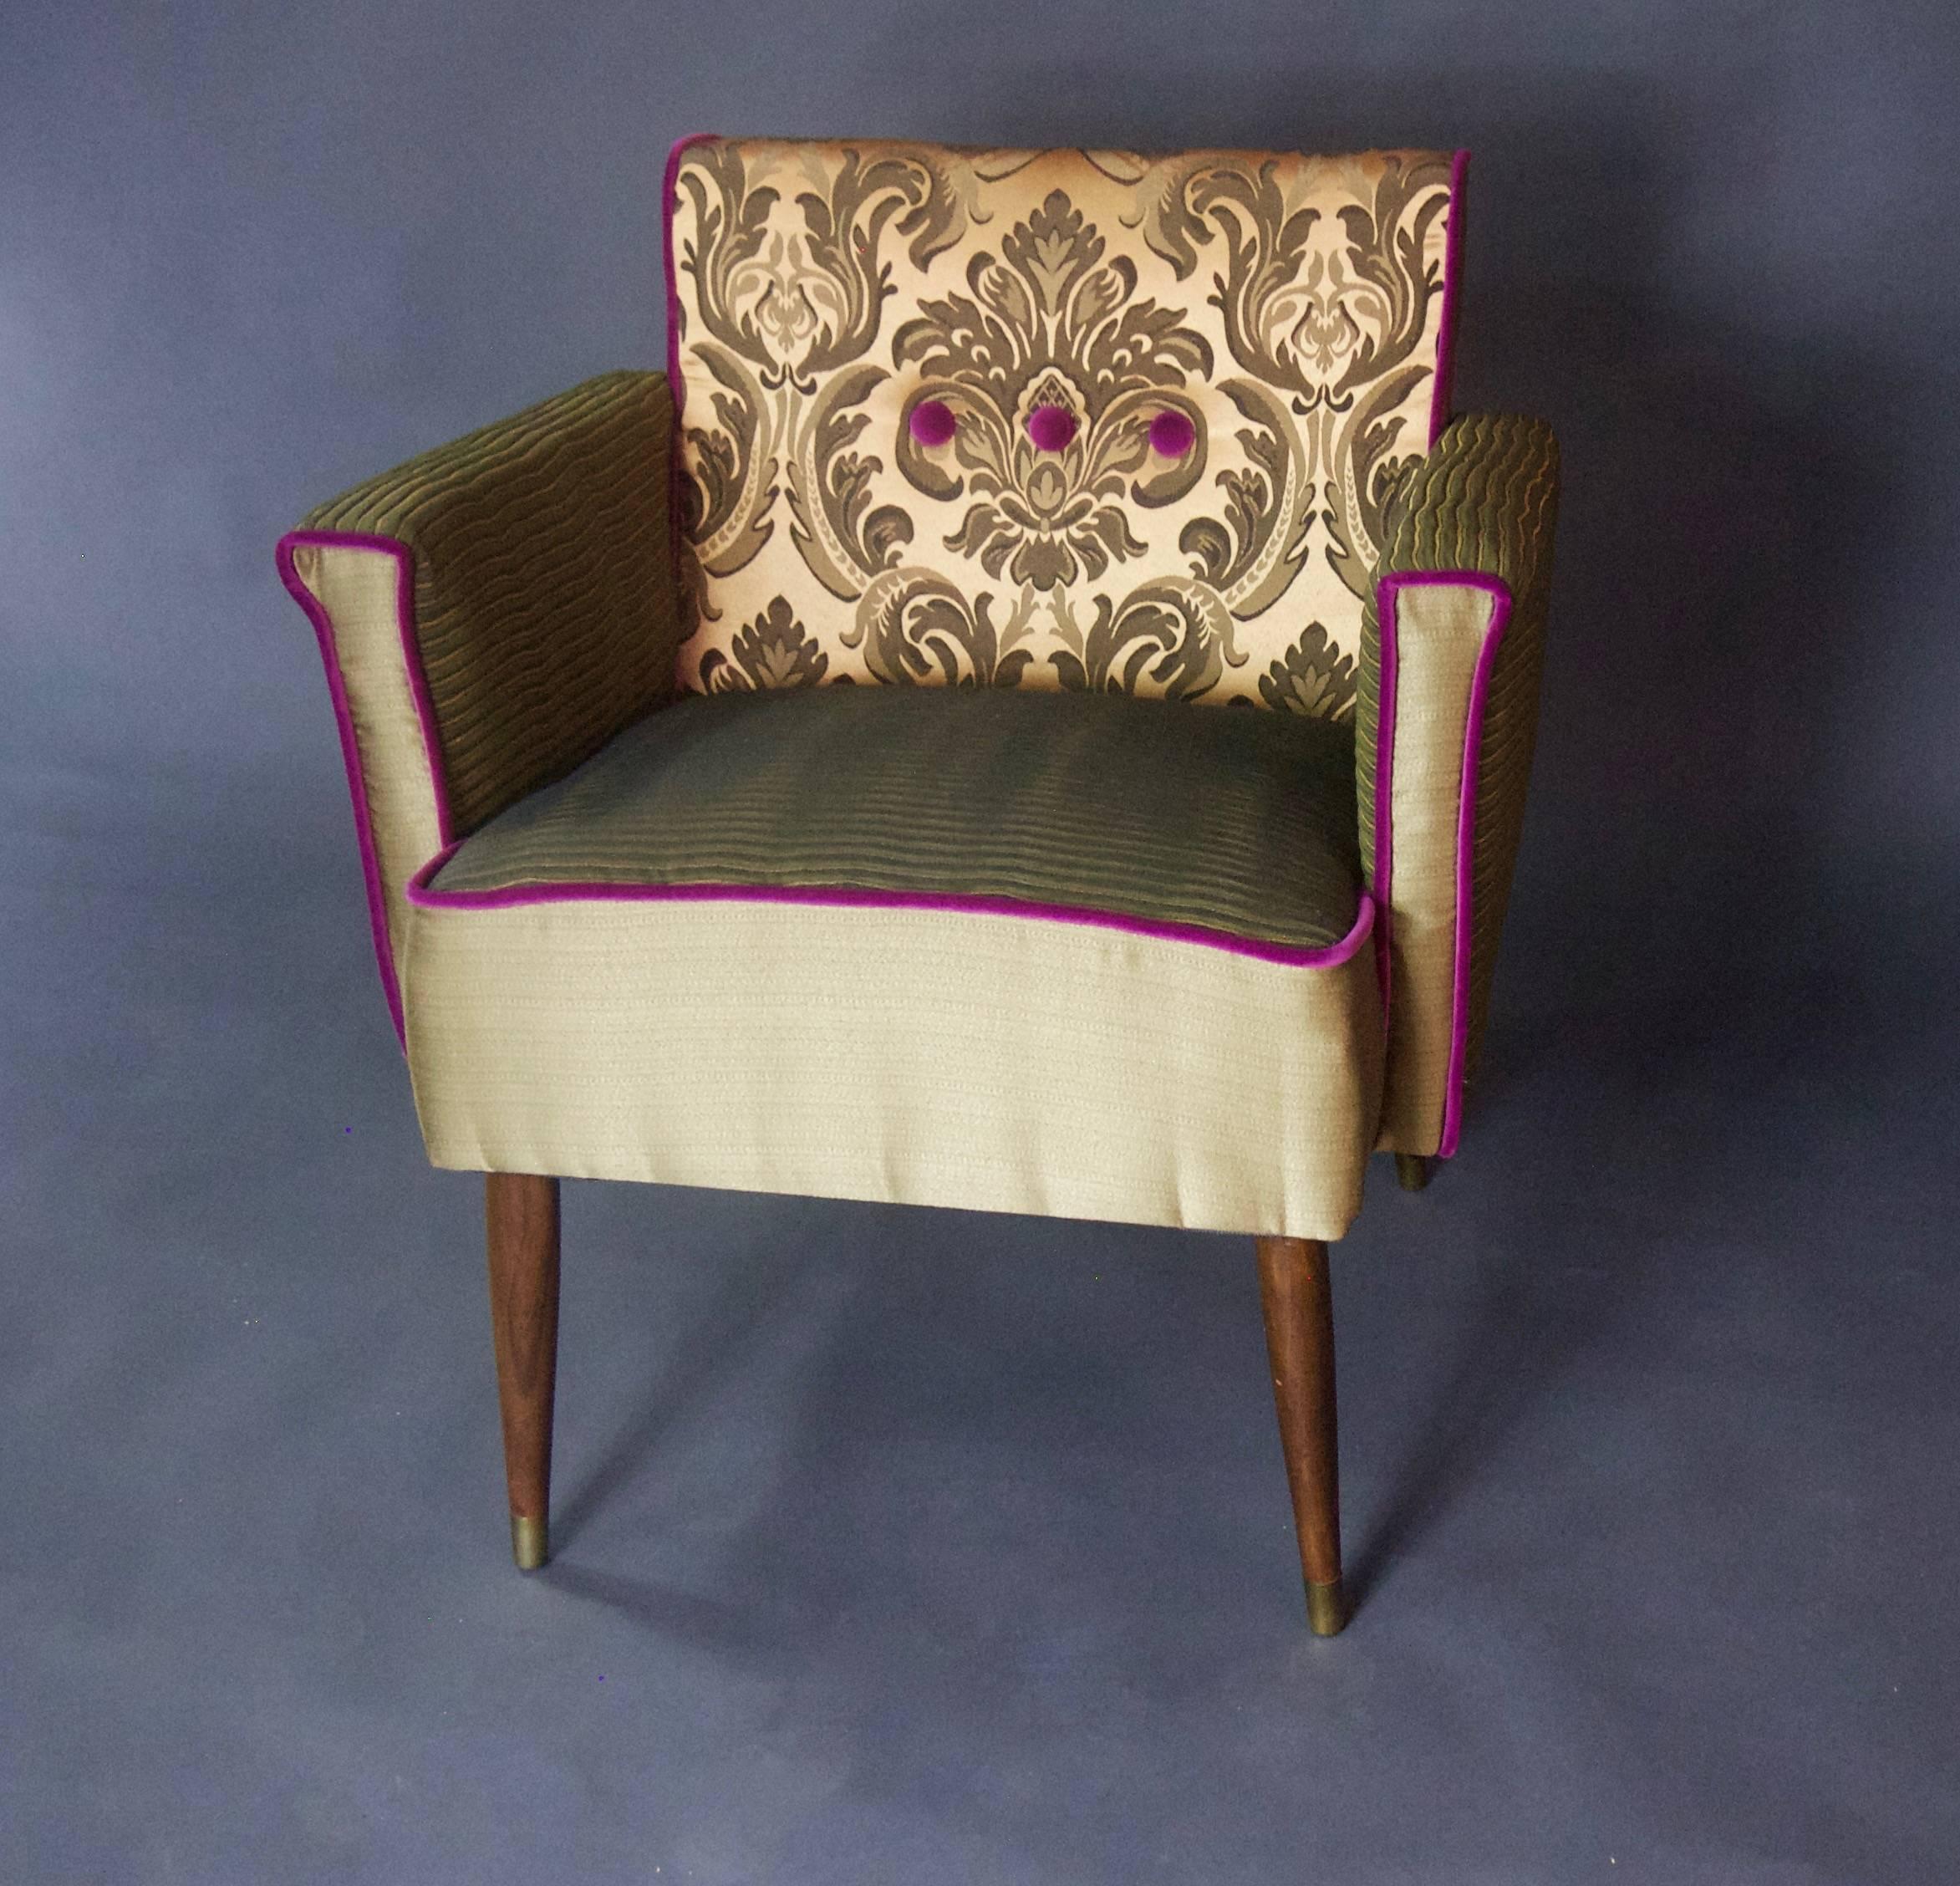 A low-slung armchair that looks straight off the set of Mad Men. It boasts a silk damask inside/outside back, with ribbed green seat and armrests and gold vertical panels--accented in a magenta velvet. 

An identical second chair is available so